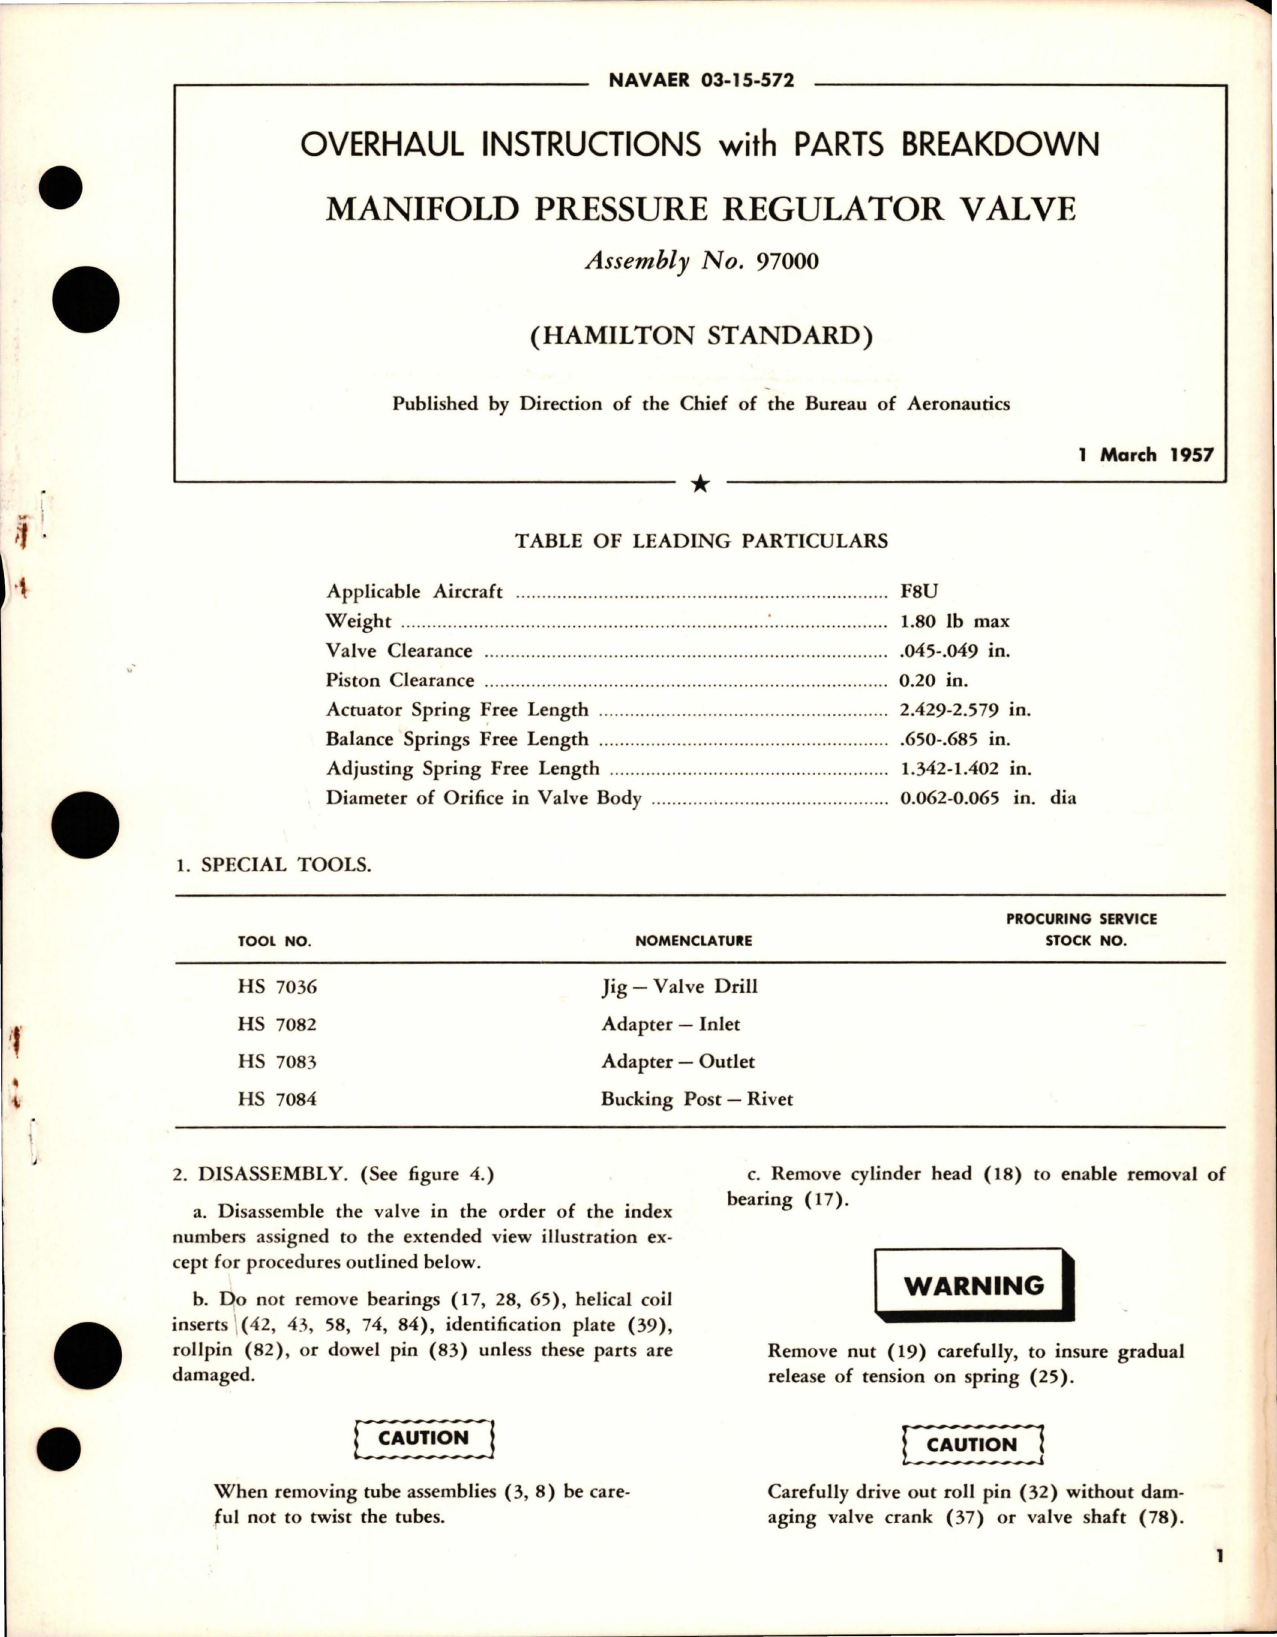 Sample page 1 from AirCorps Library document: Overhaul Instructions with Parts for Manifold Pressure Regulator Valve - Assembly No. 97000